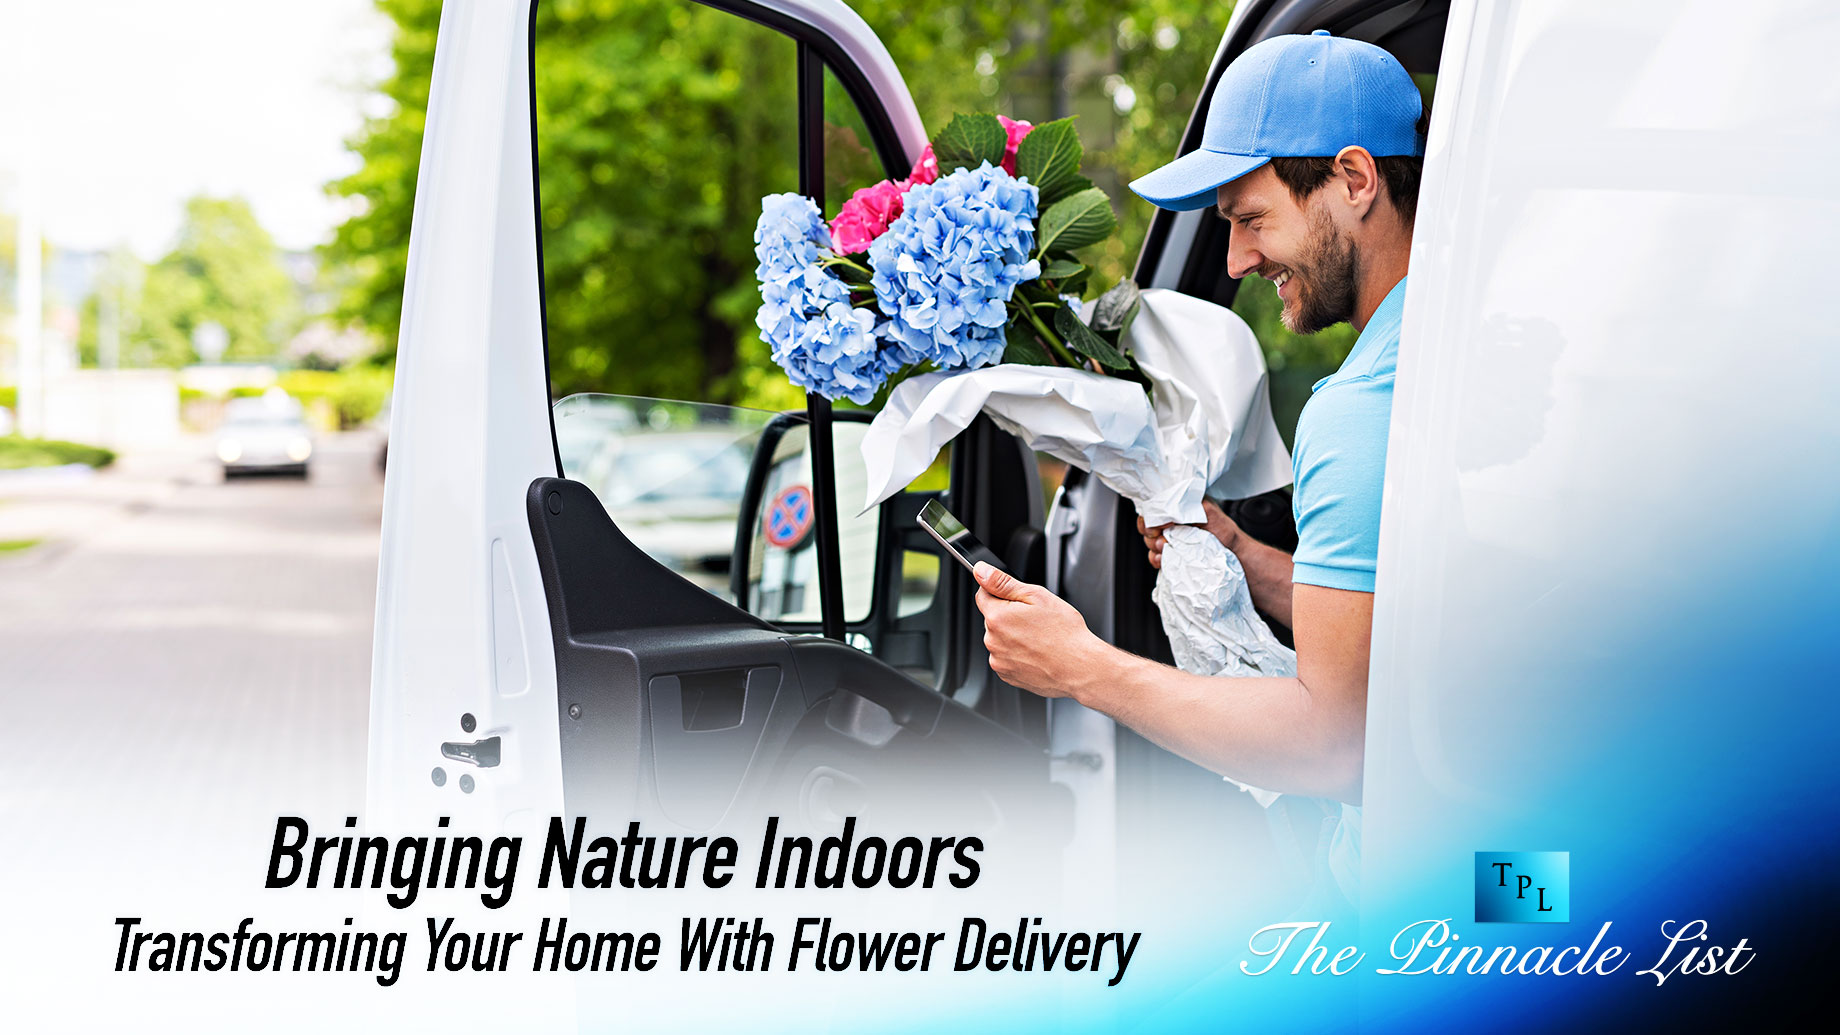 Bringing Nature Indoors: Transforming Your Home With Flower Delivery